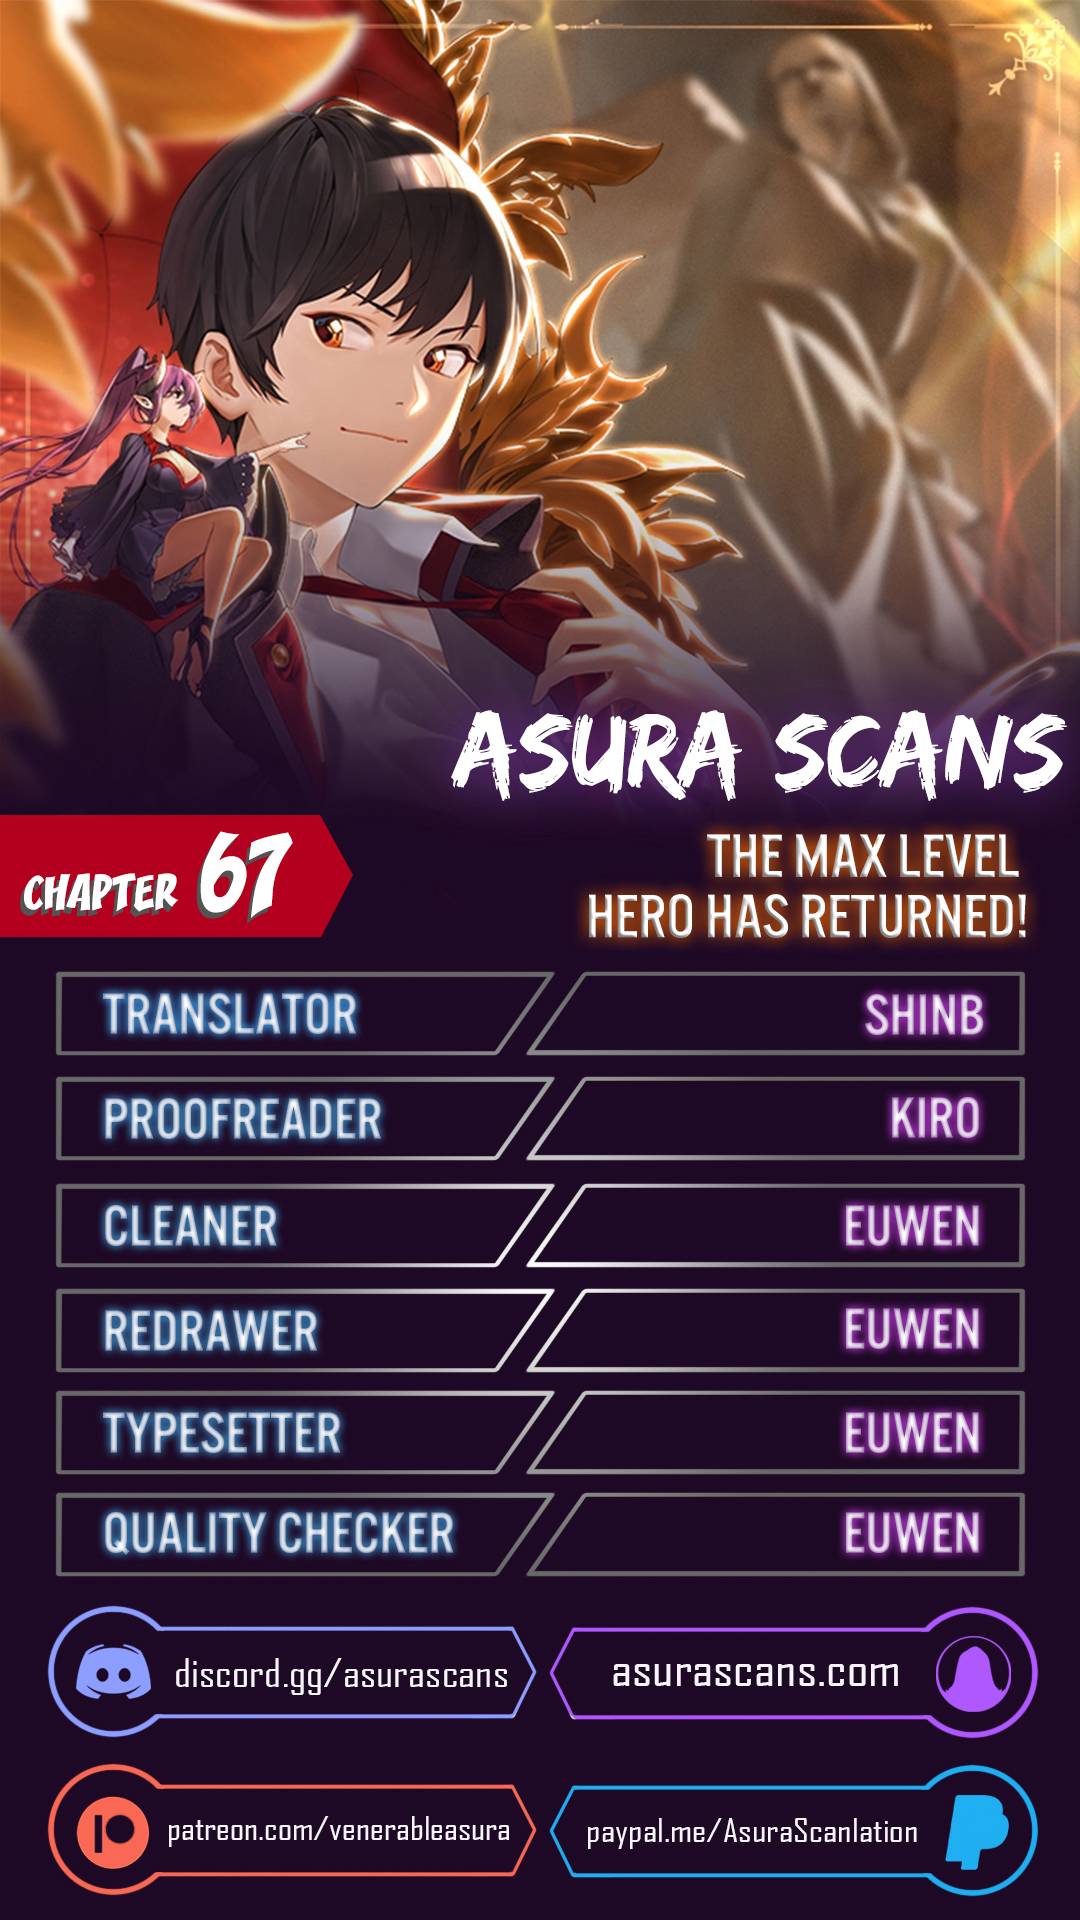 The MAX leveled hero will return! Chapter 67